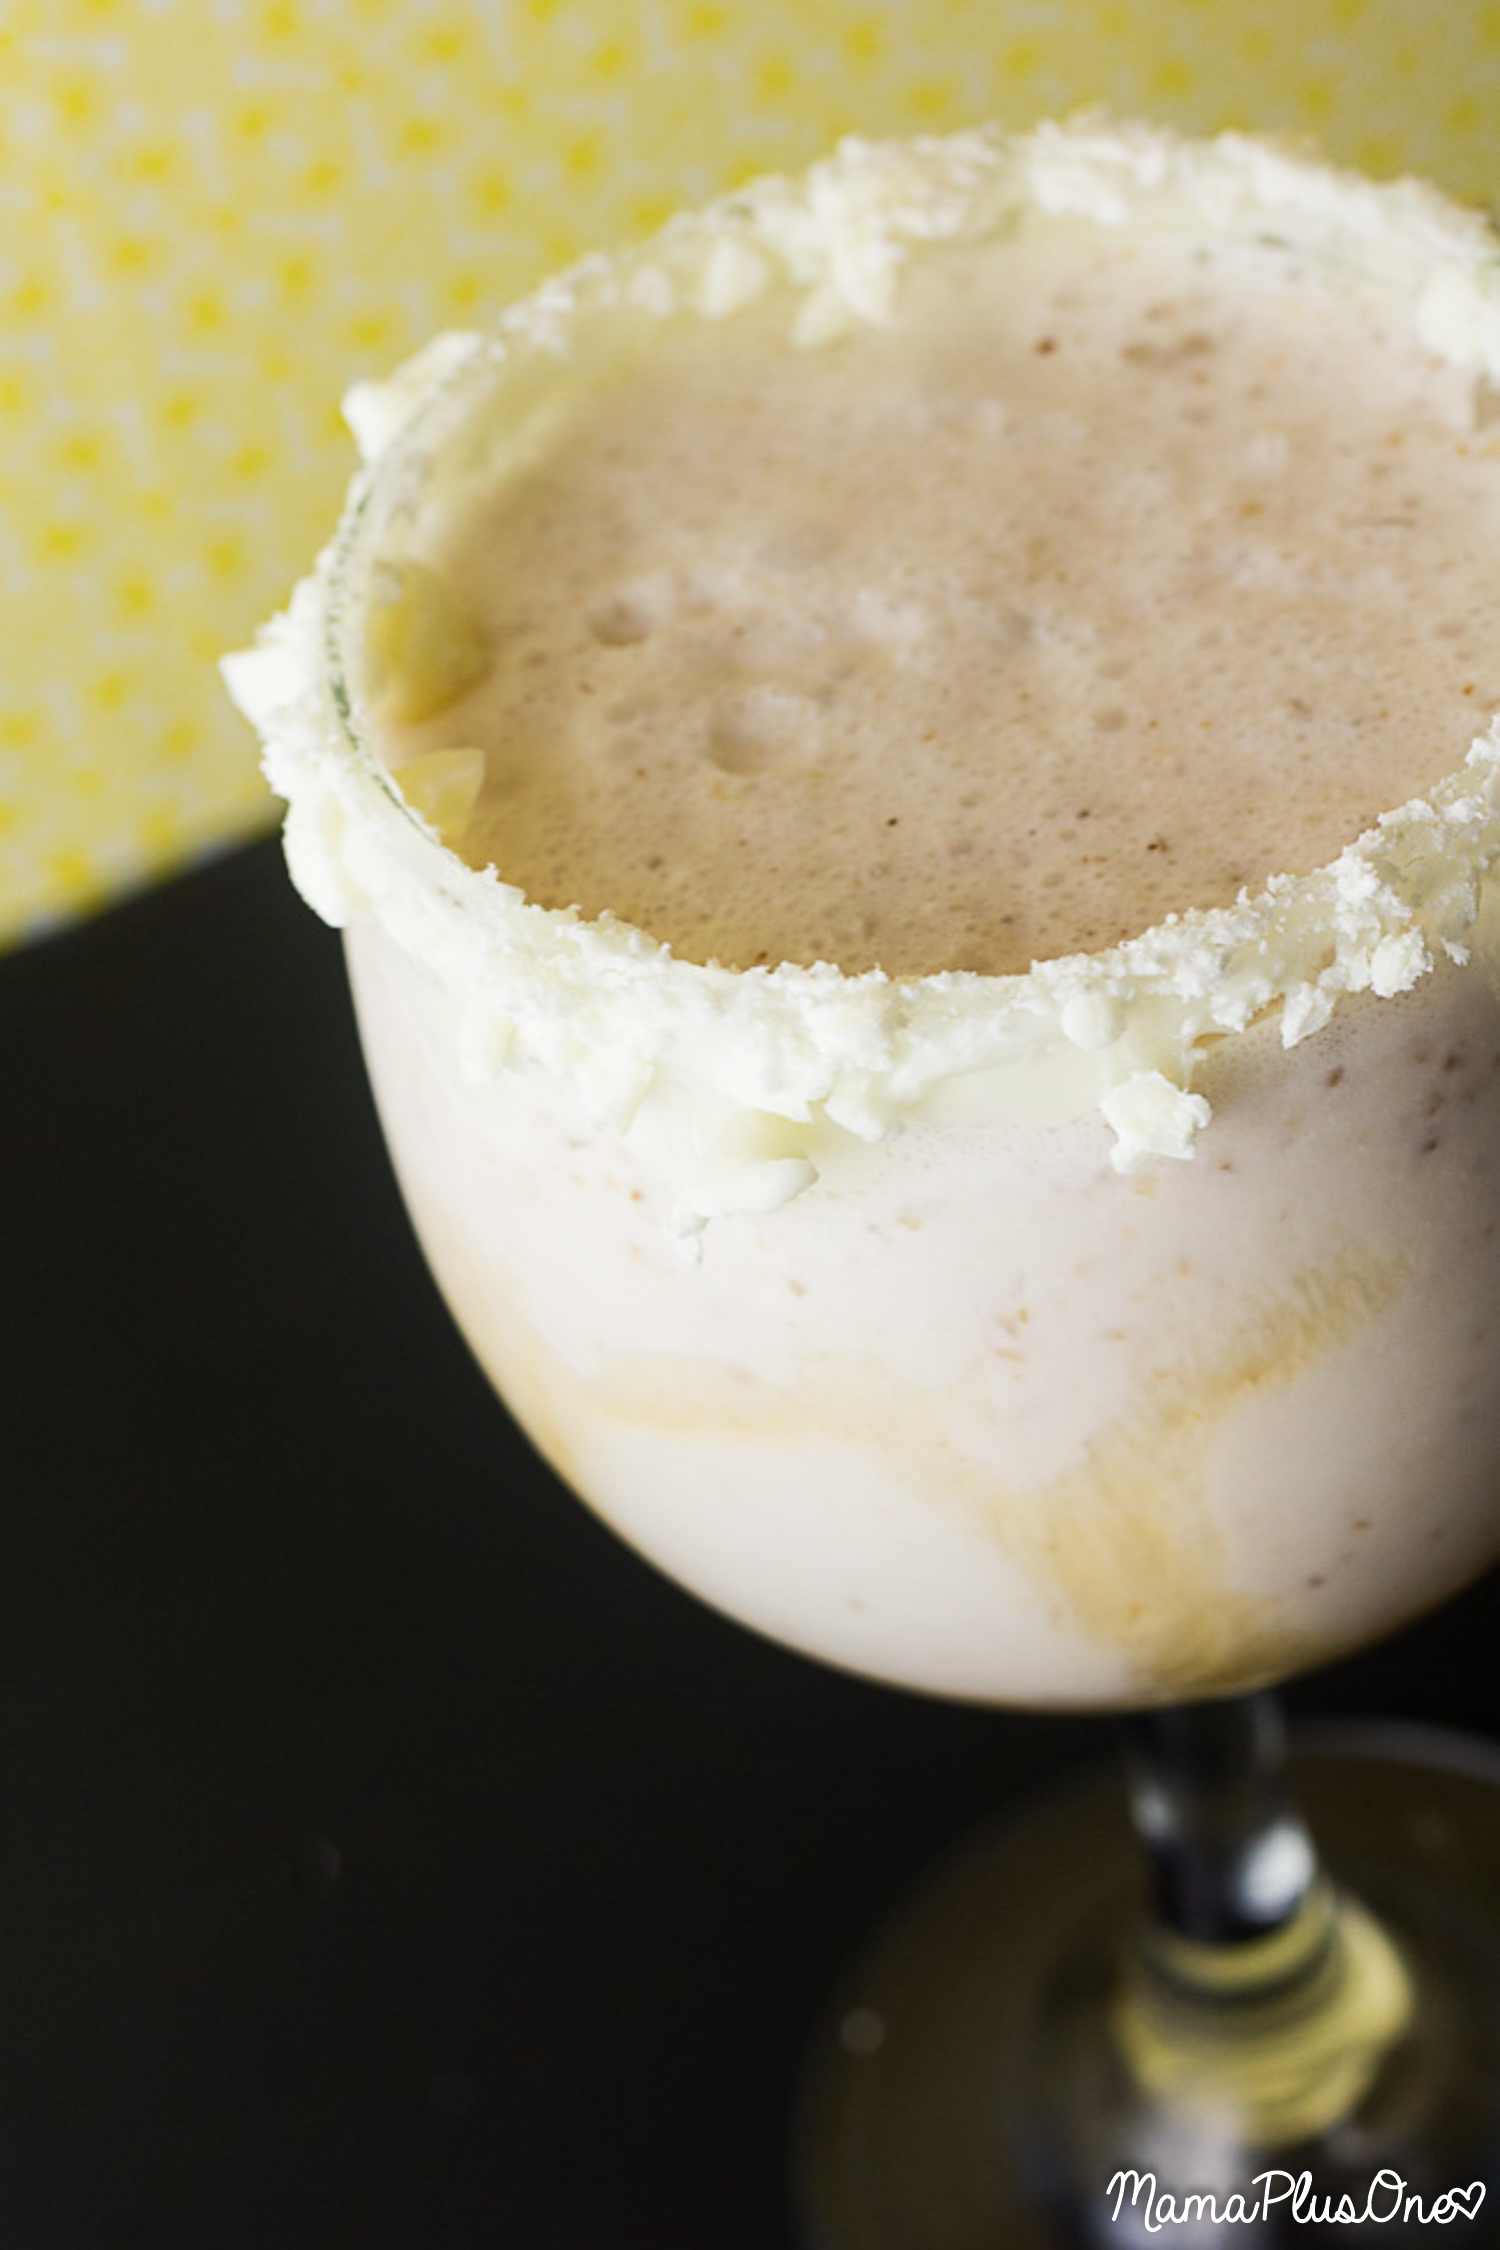 Looking for a fun twist on your average mudslide? Here's a maple cactus mudslide mocktail, the perfect frozen blended treat! With white chocolate, maple syrup, and a splash of cactus water, it's everything you want in a mudslide and then some! This one is perfect for brunch! | Mocktail Recipe | Maple Syrup | Brunch drink |